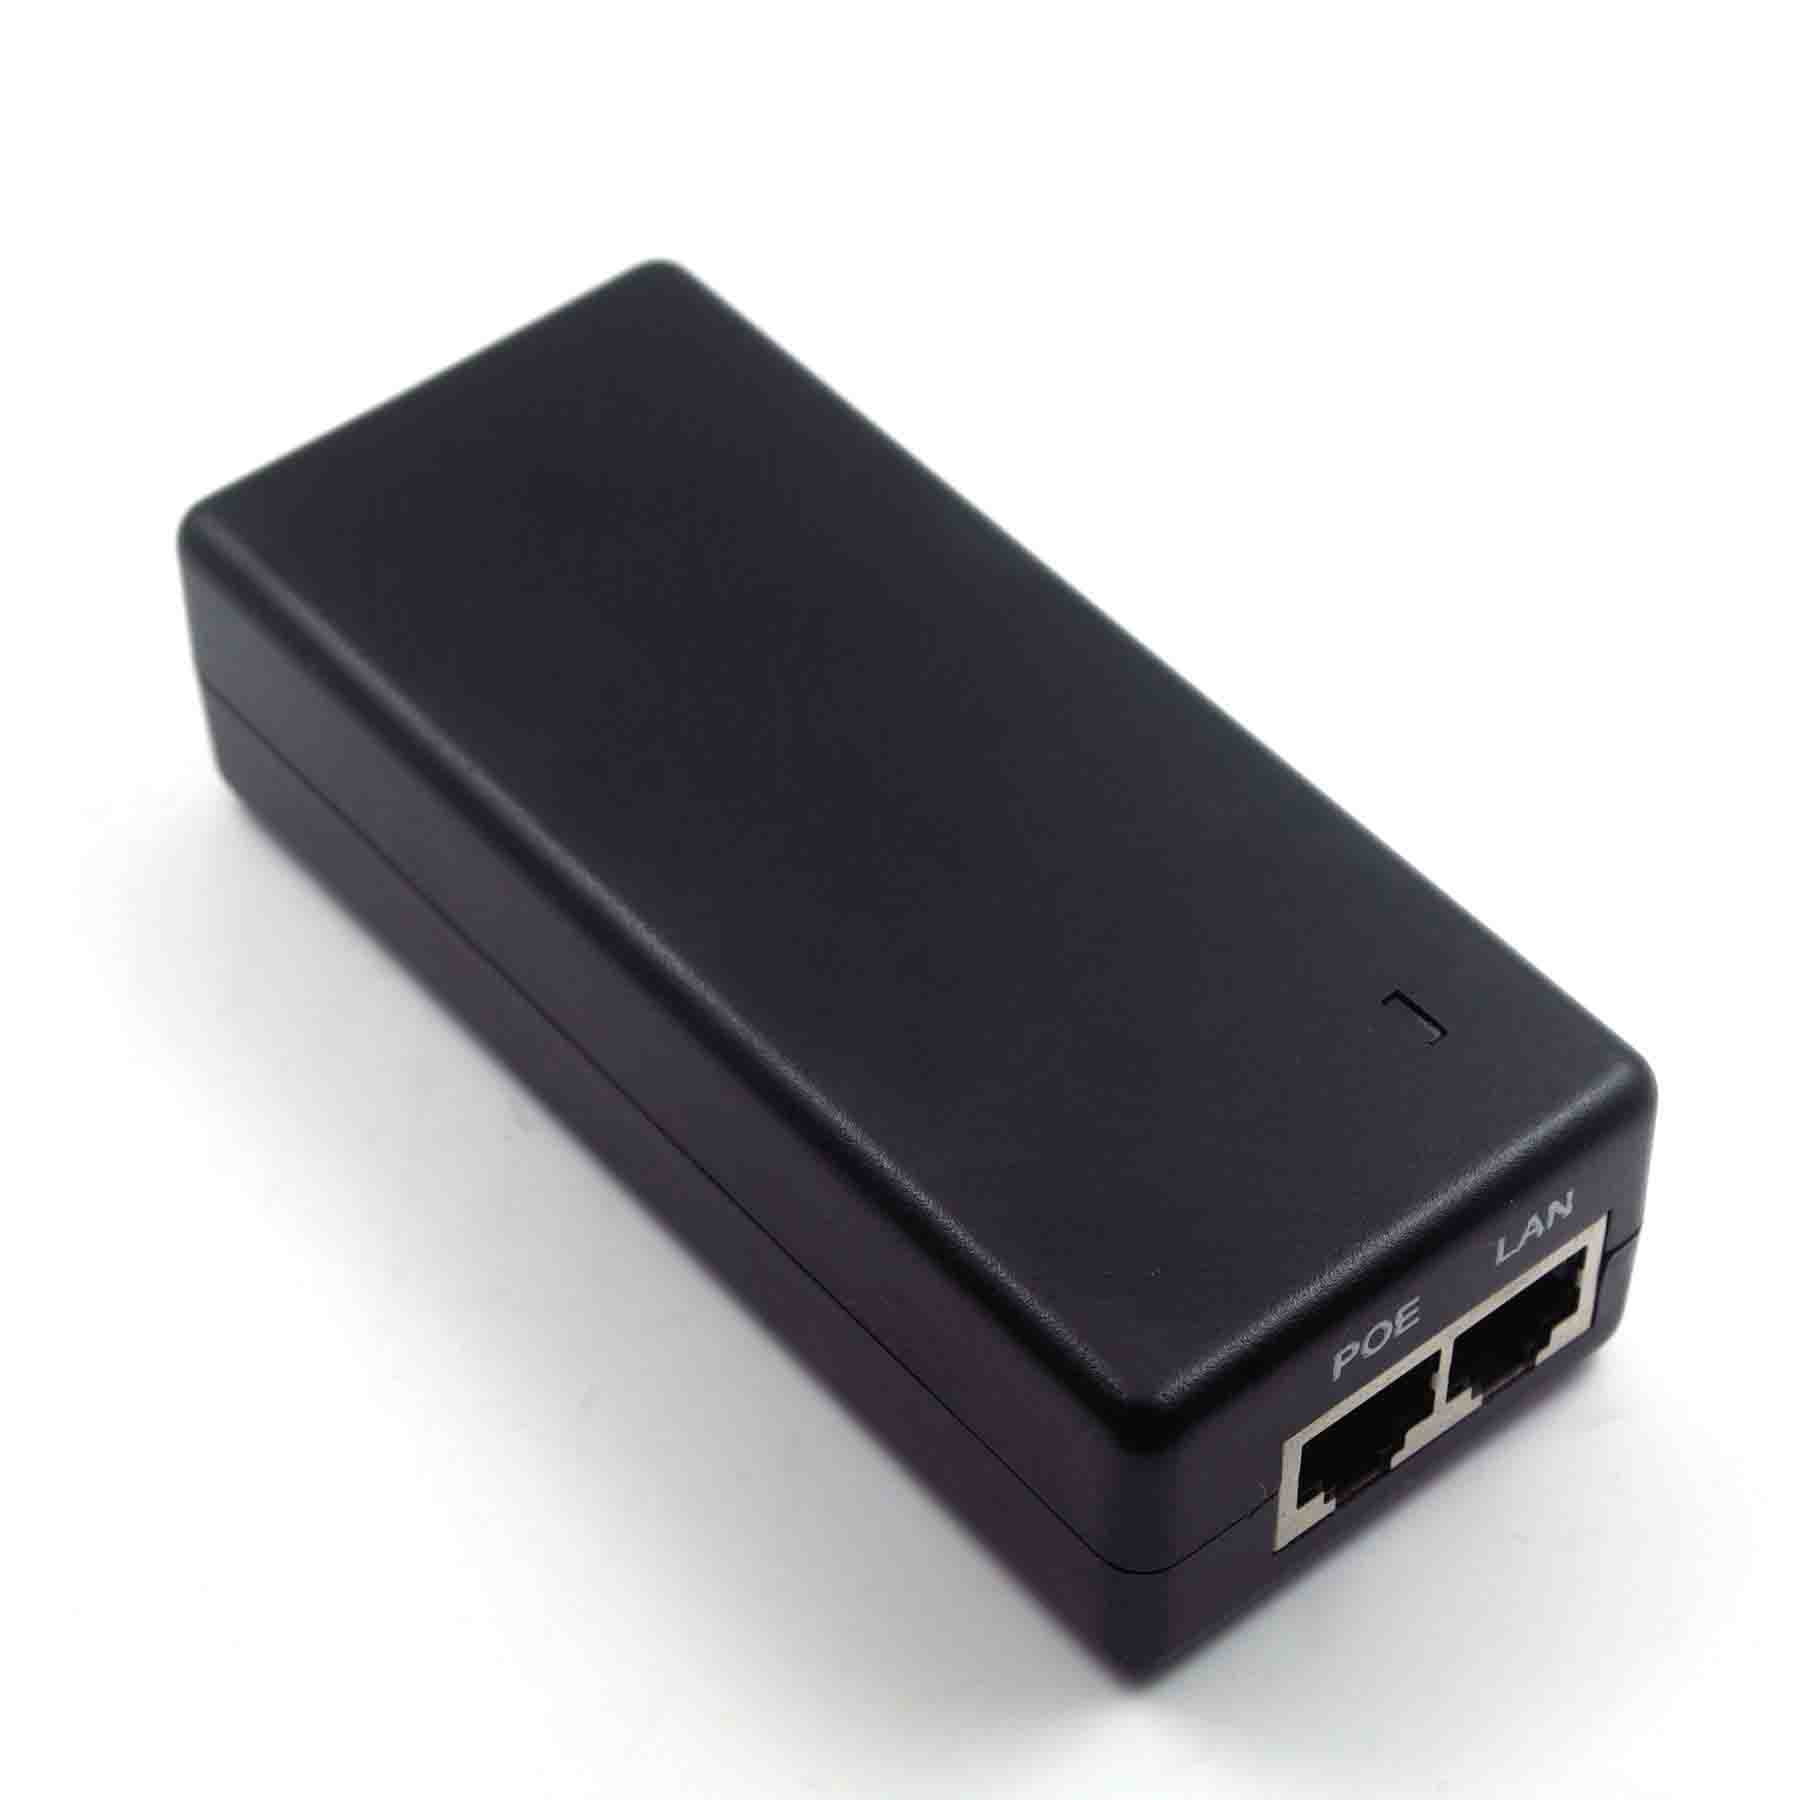 48VDC 1.25A POE adapter, 48V 1.25A POE injector